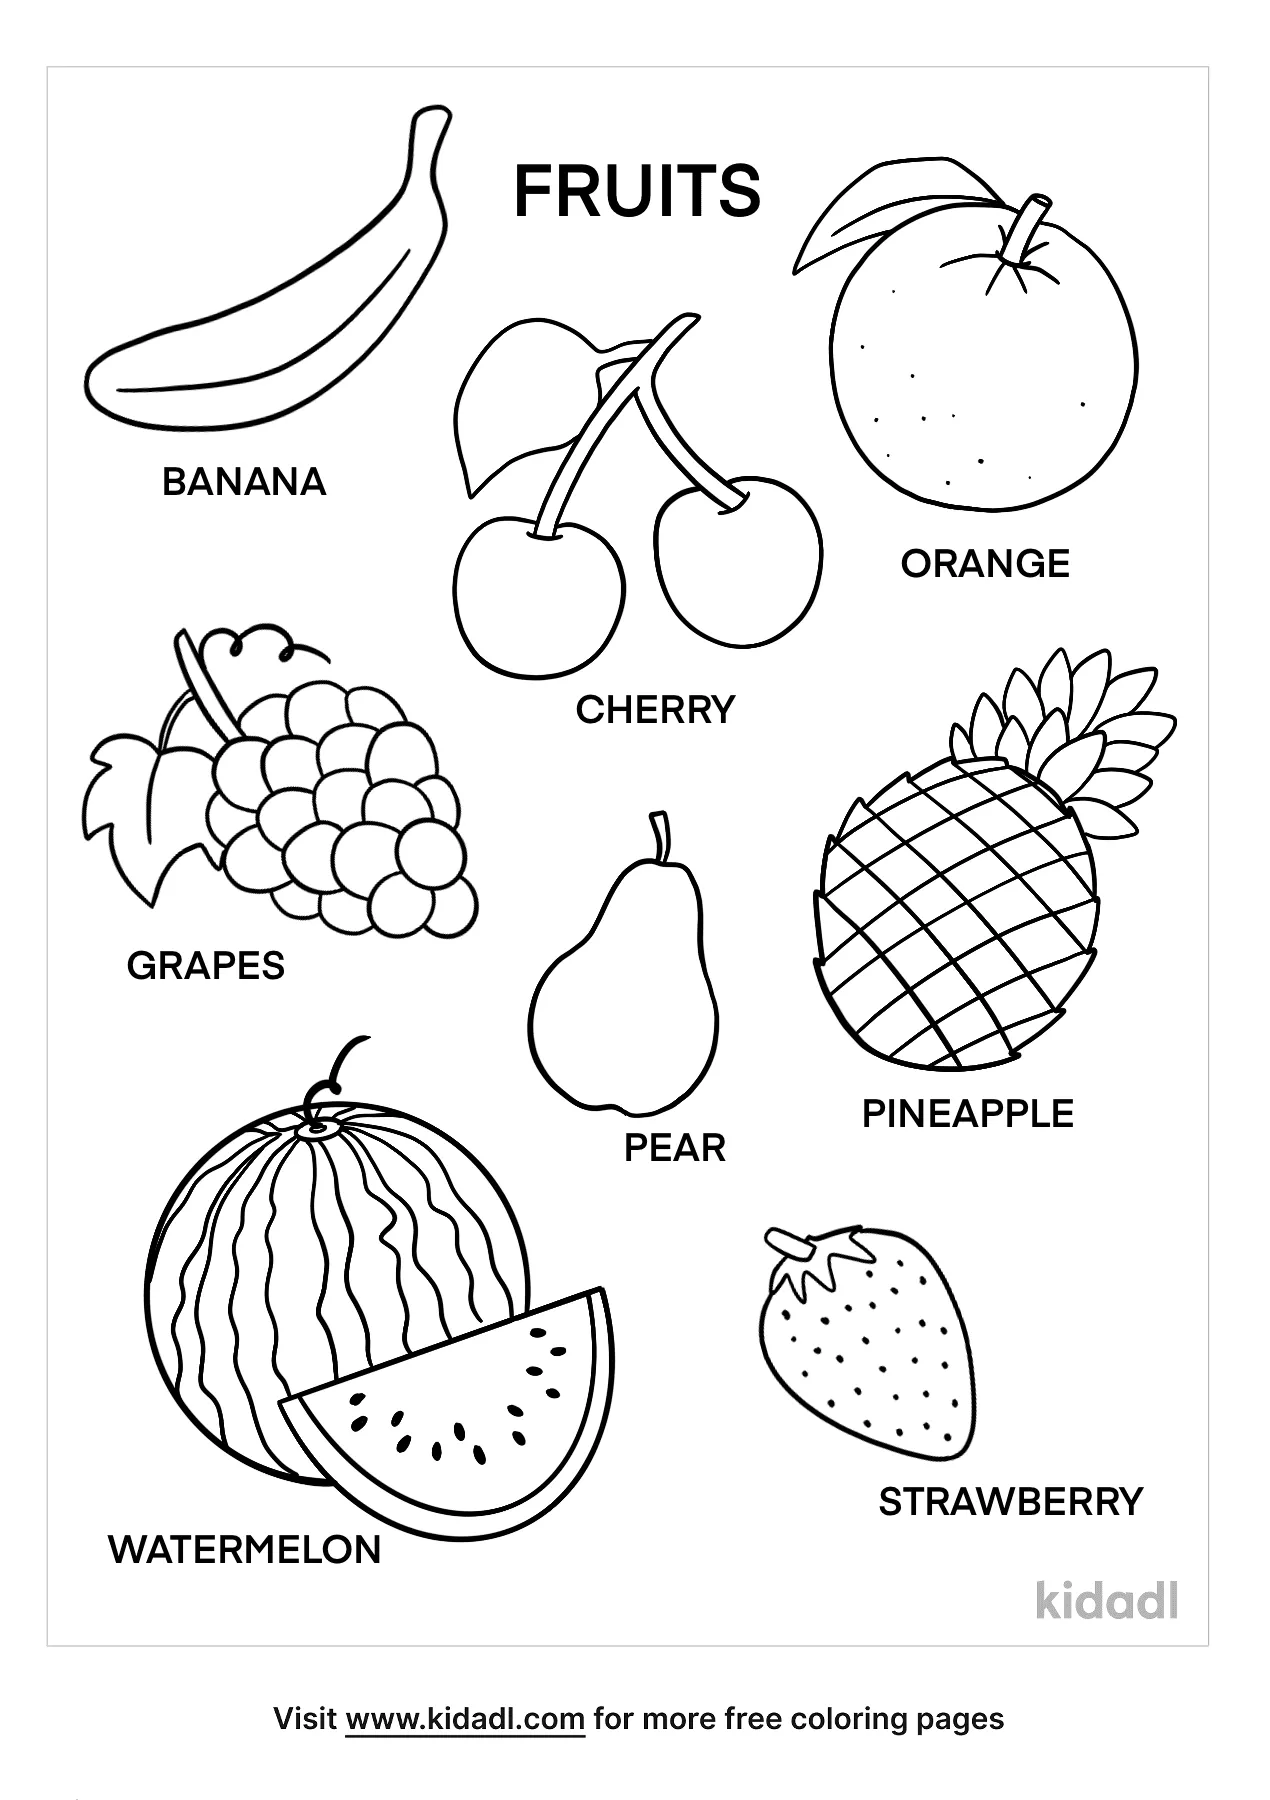 Names Of Fruits Coloring Page   Free Fruit Coloring Page   Kidadl